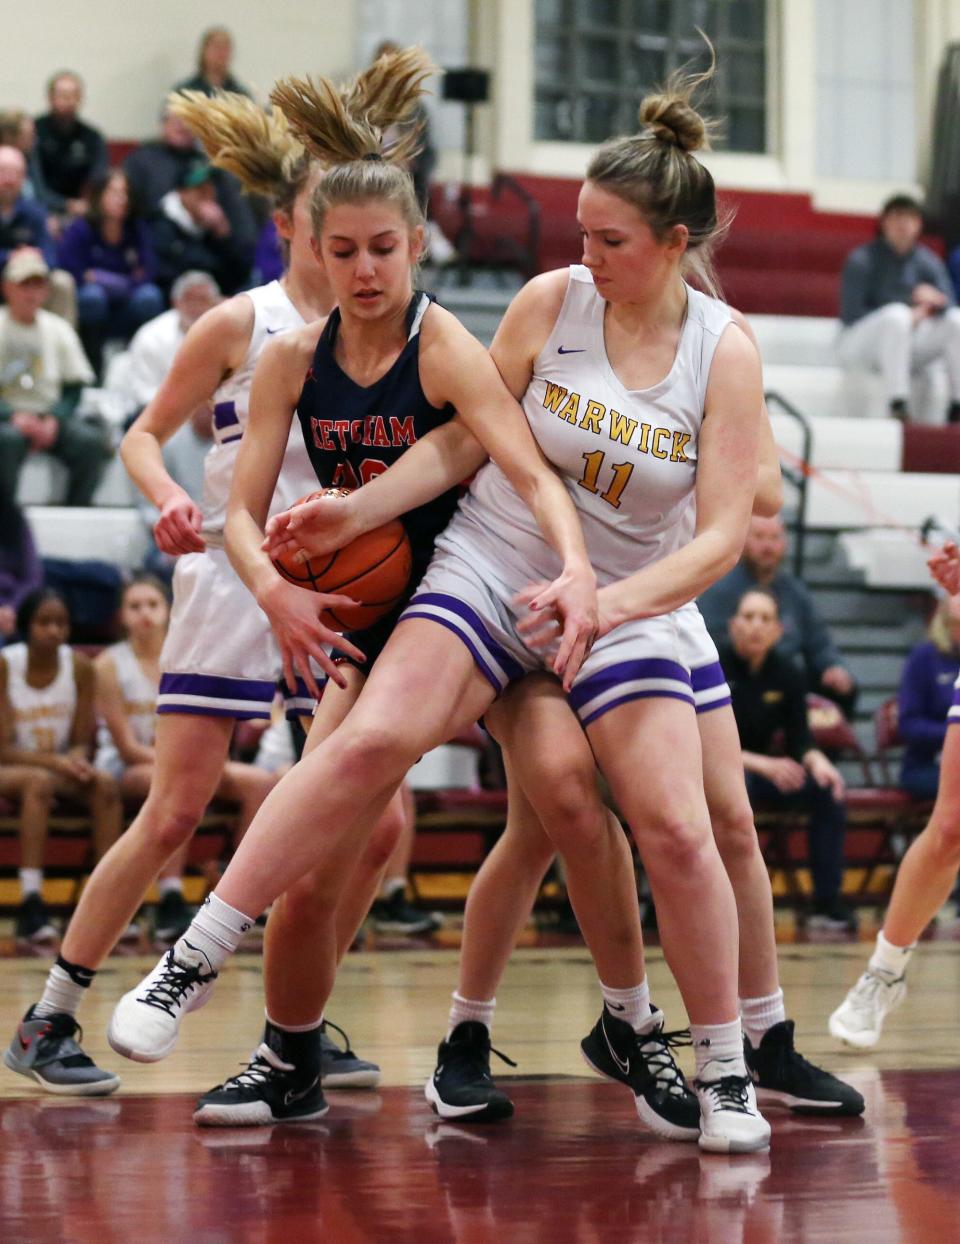 Warwick's Lindsay Evans and Ketcham's Caitlin Robertson wrestle for possession of the ball during a Class AA girls basketball regional semifinal on March 8, 2022.